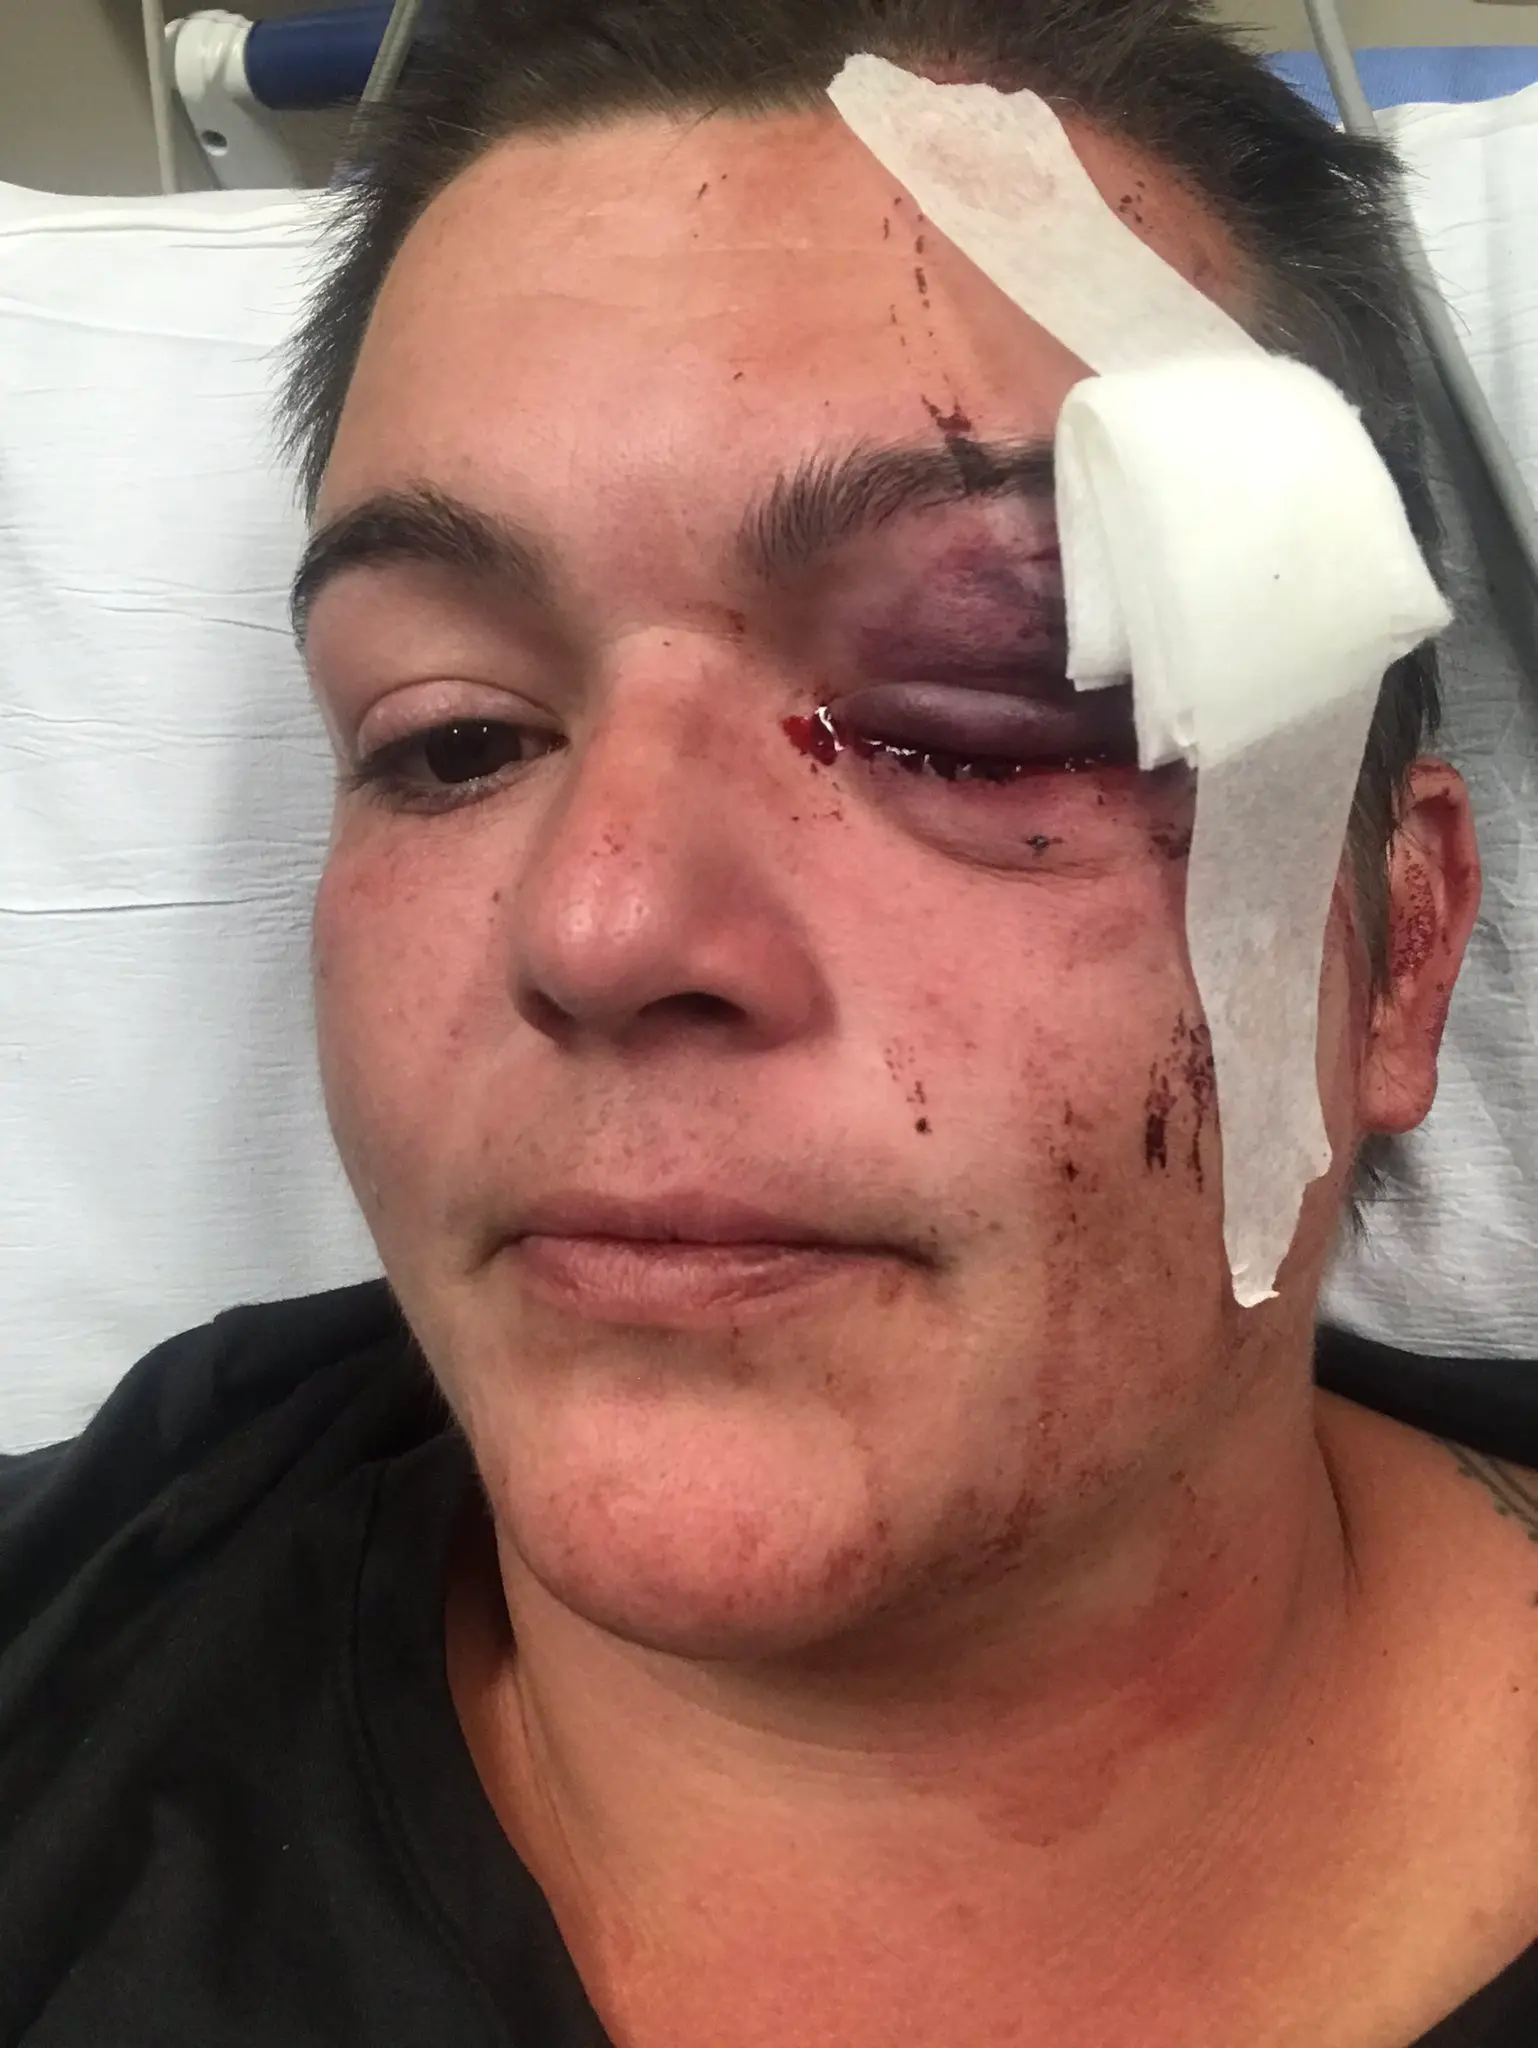 A selfie tweeted by Linda Tirado May 29, 2020. Alongside the image, she tweeted, "Hey folks, took a tracer found to the face (I think, given my backpack) and am headed into surgery to see if we can save my left eye."